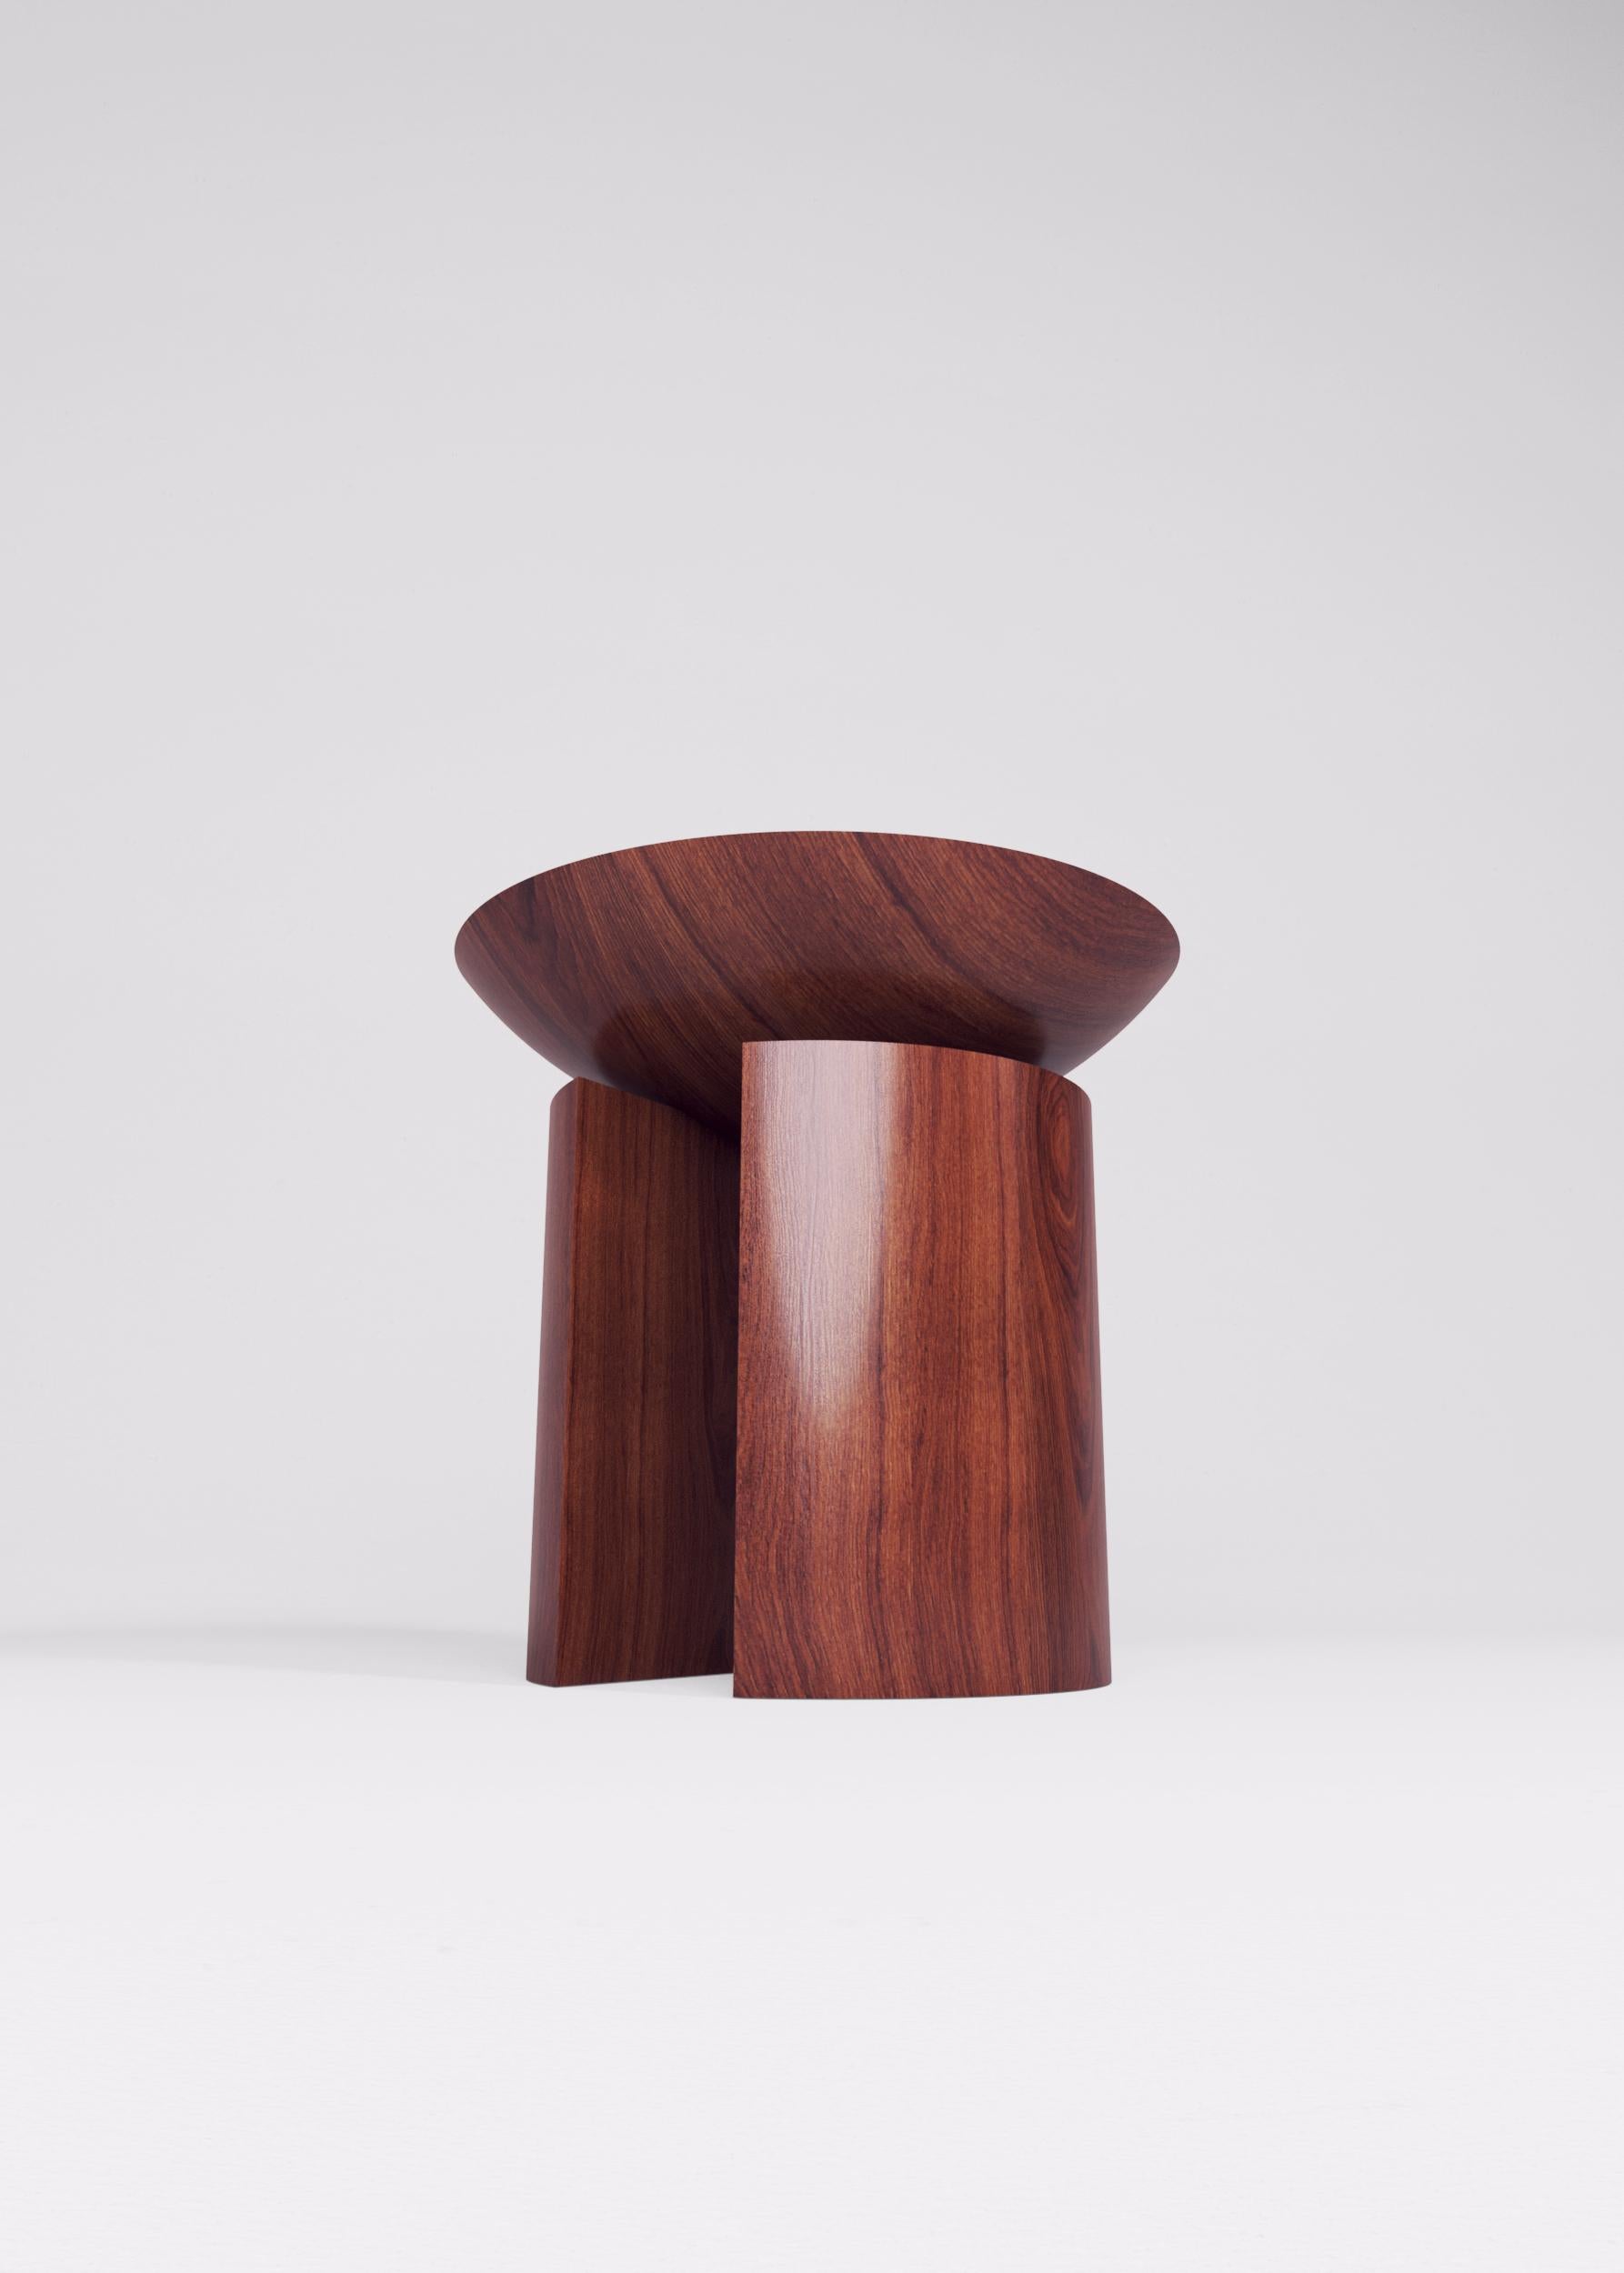 Brazilian Anca Larga in Oil / Sculptural Side Table/Stool / Hardwood by Pedro Paulo Venzon For Sale